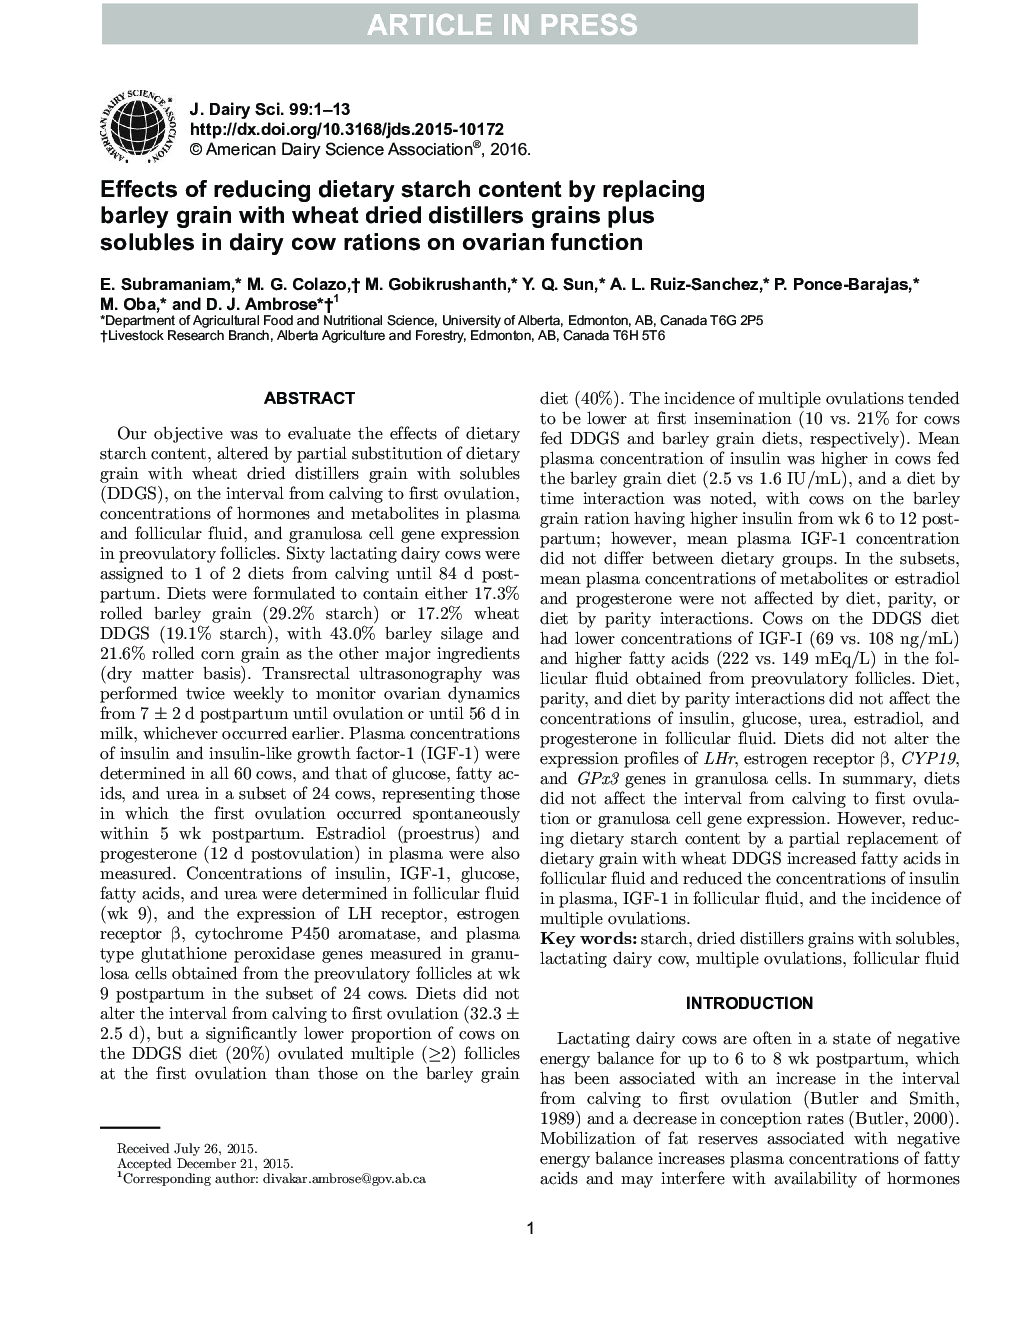 Effects of reducing dietary starch content by replacing barley grain with wheat dried distillers grains plus solubles in dairy cow rations on ovarian function